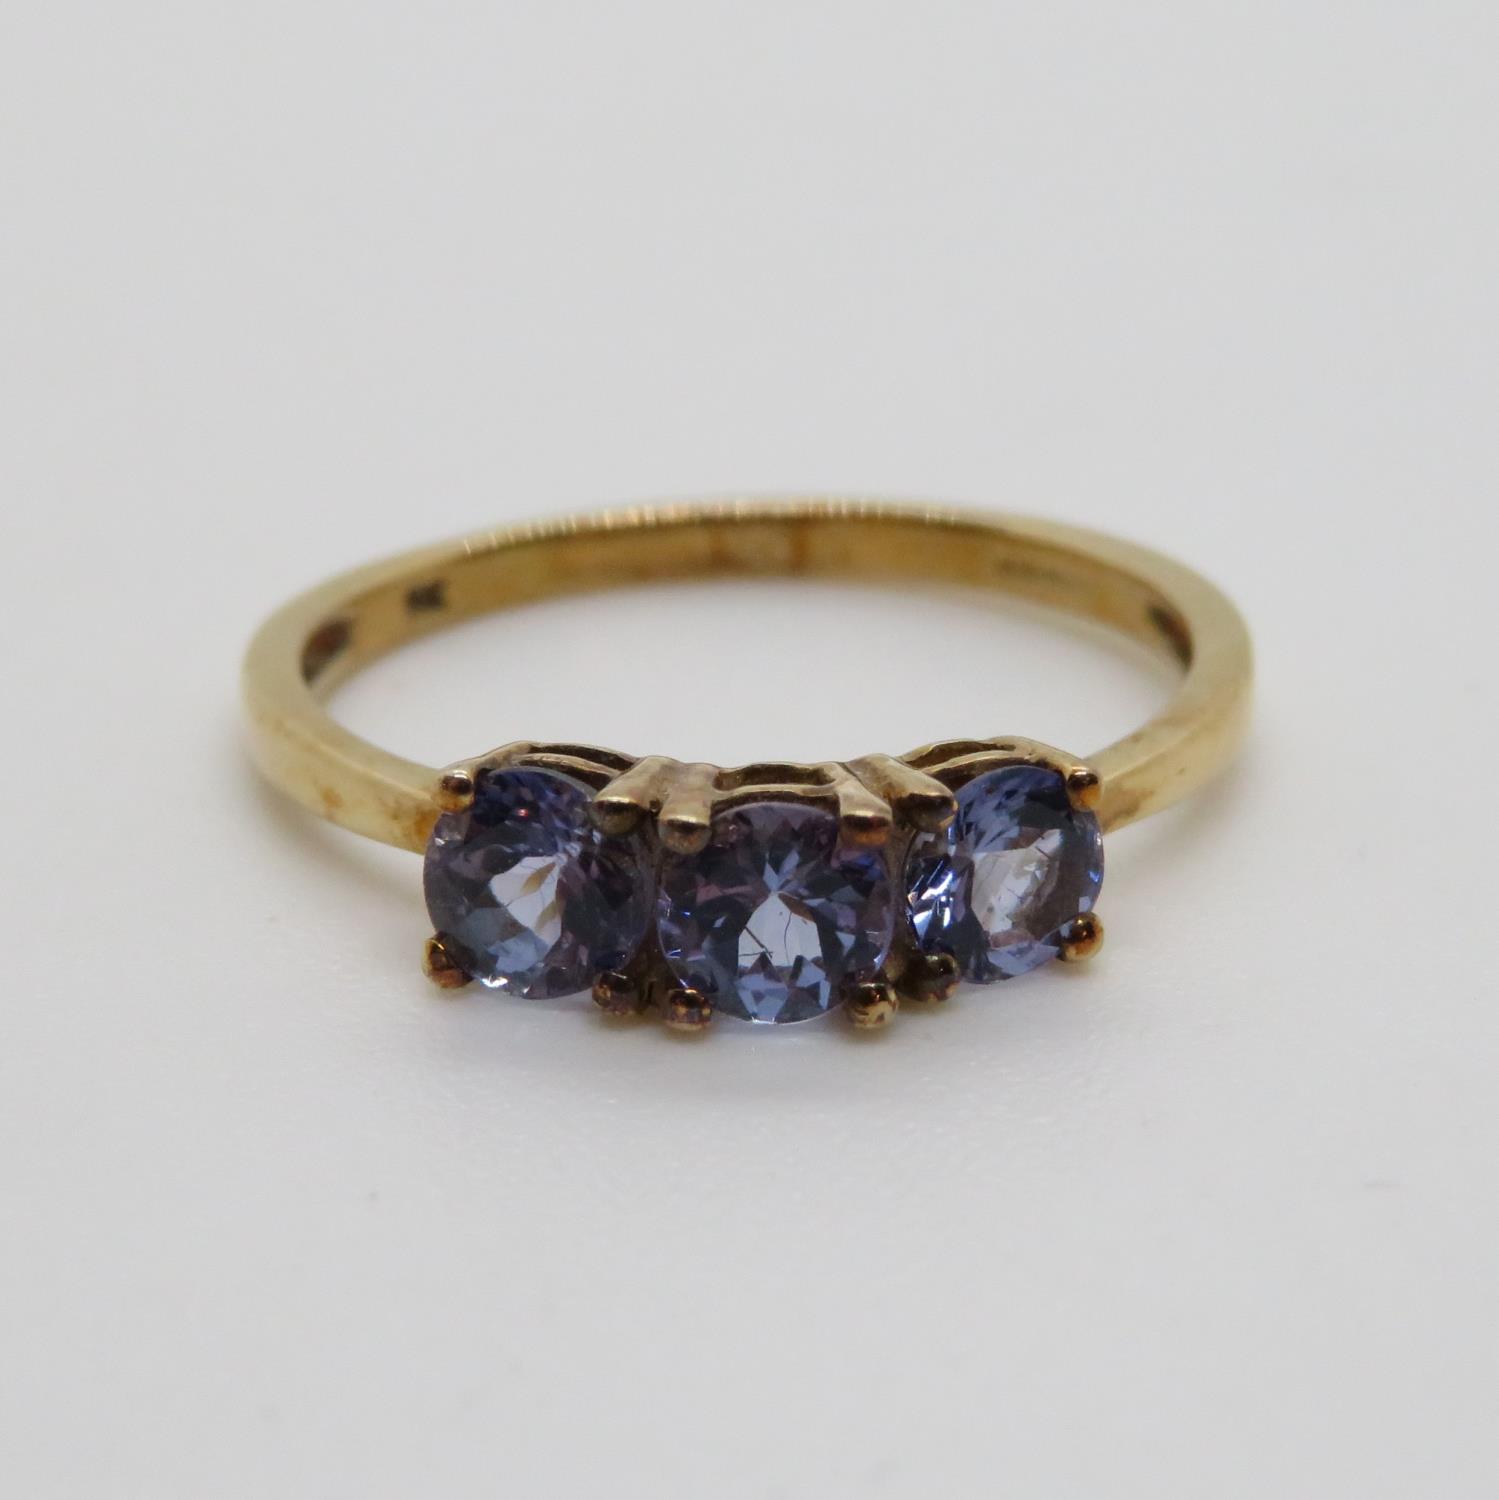 9ct gold ring 1.6g size O with possibly Tanzanite stones